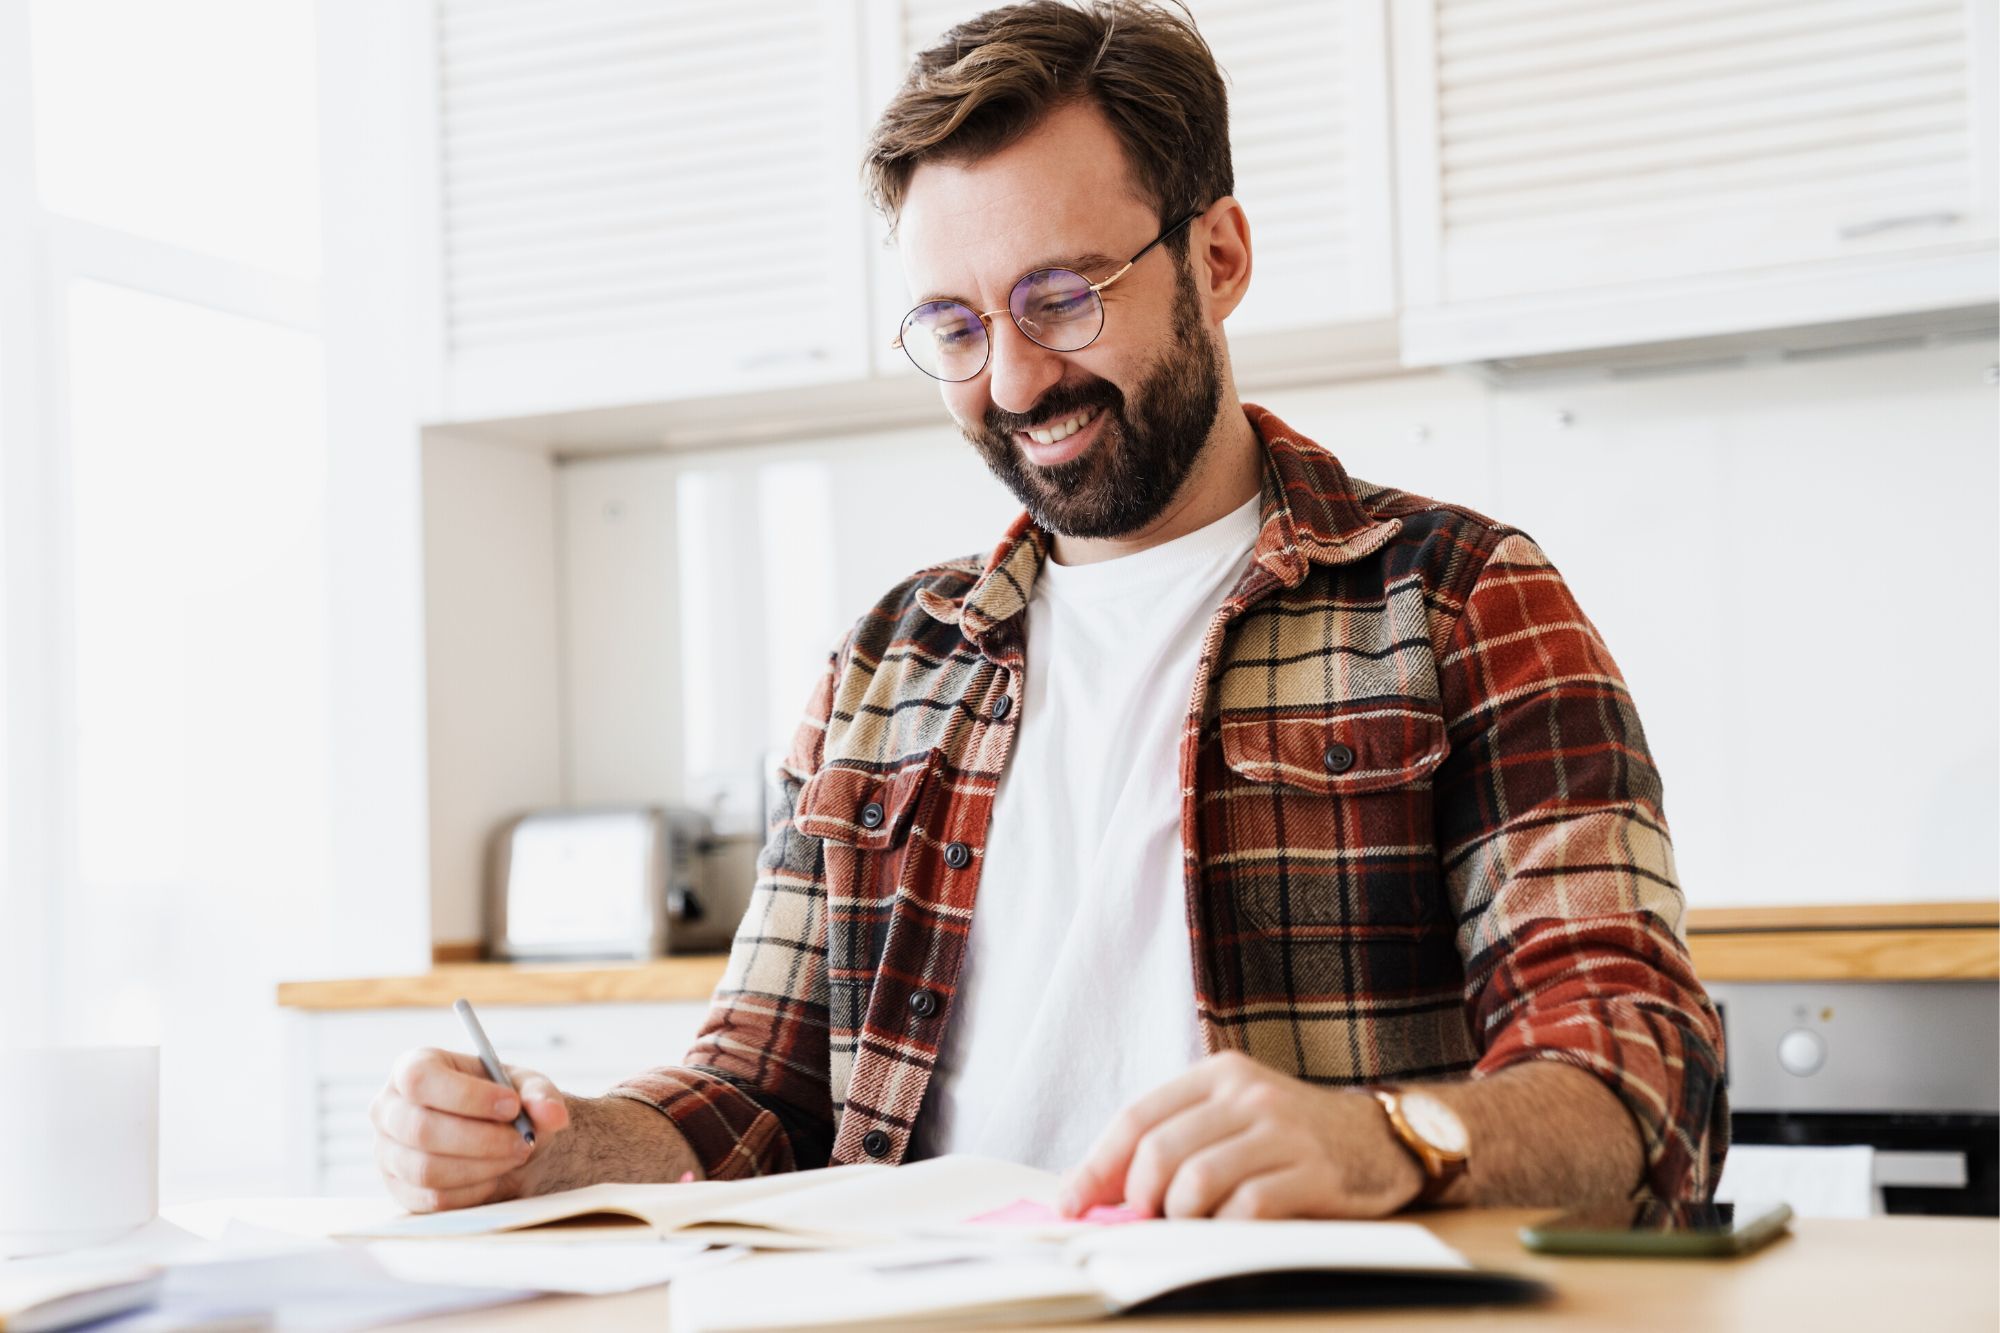 Man writing notes feeling good about himself